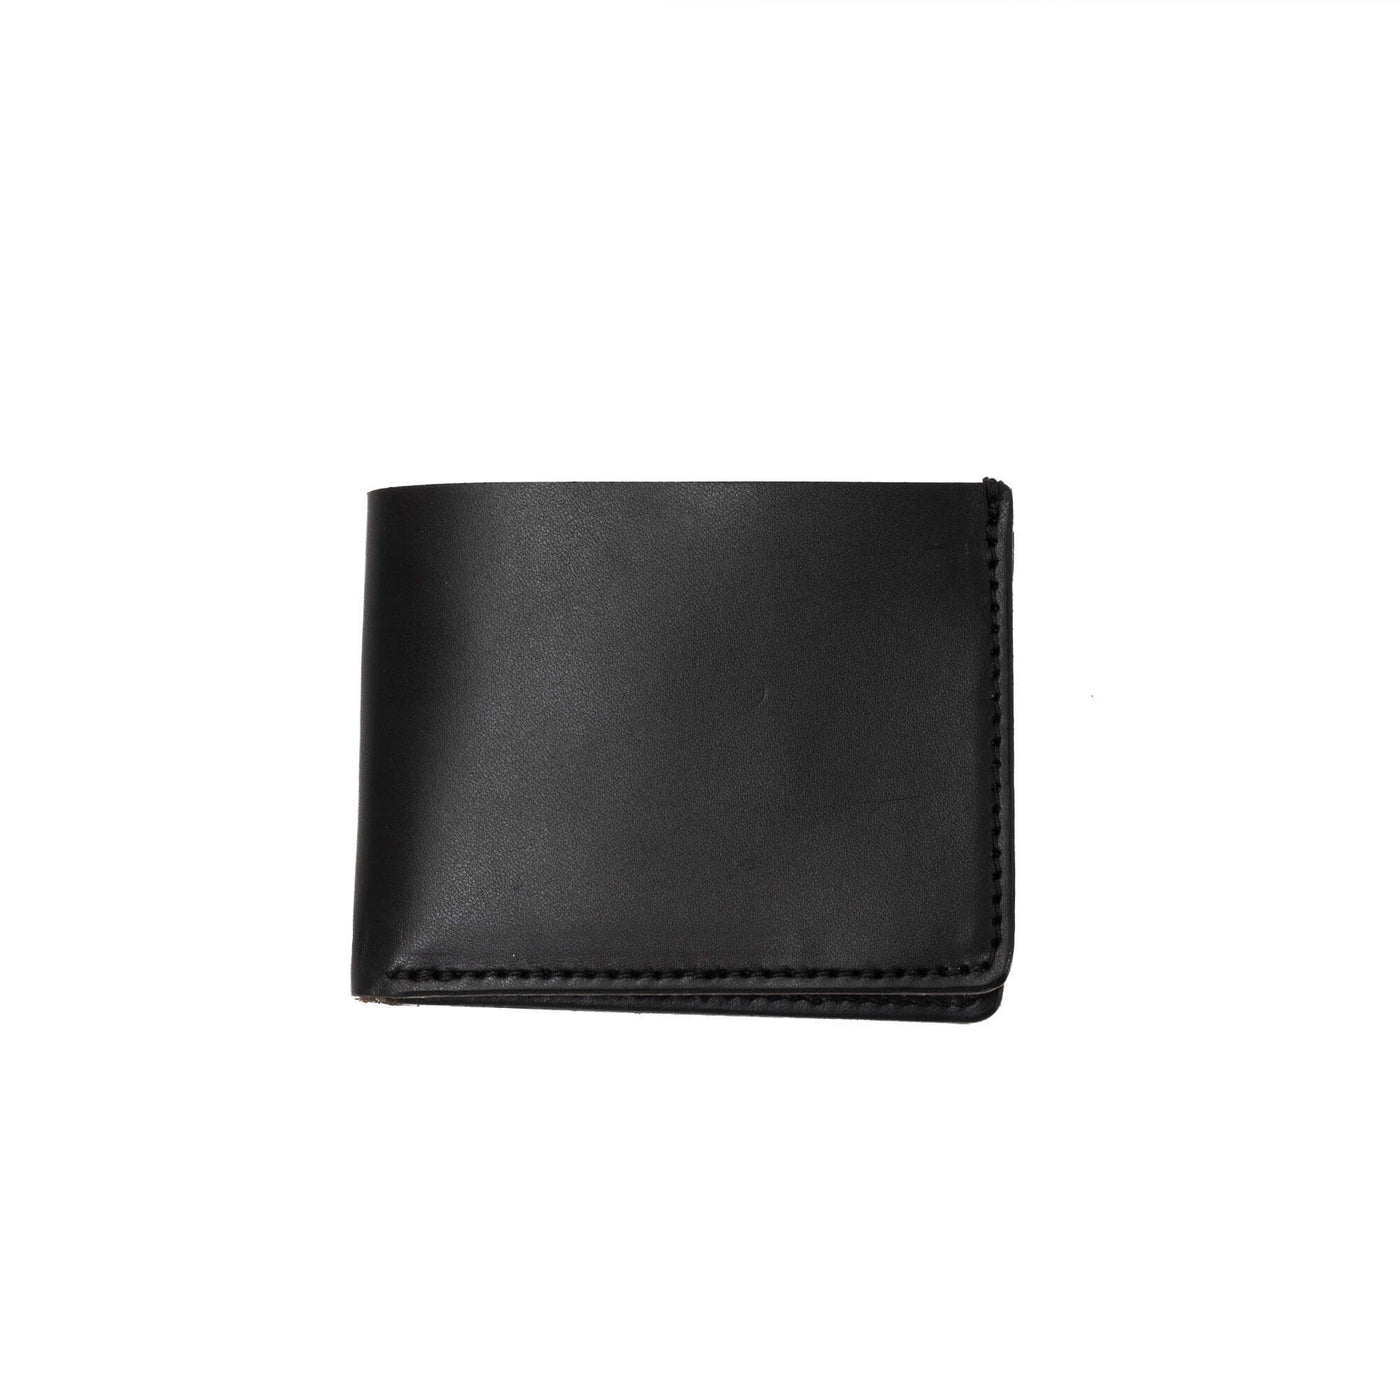 Slim Bifold by Lifetime Leather Co